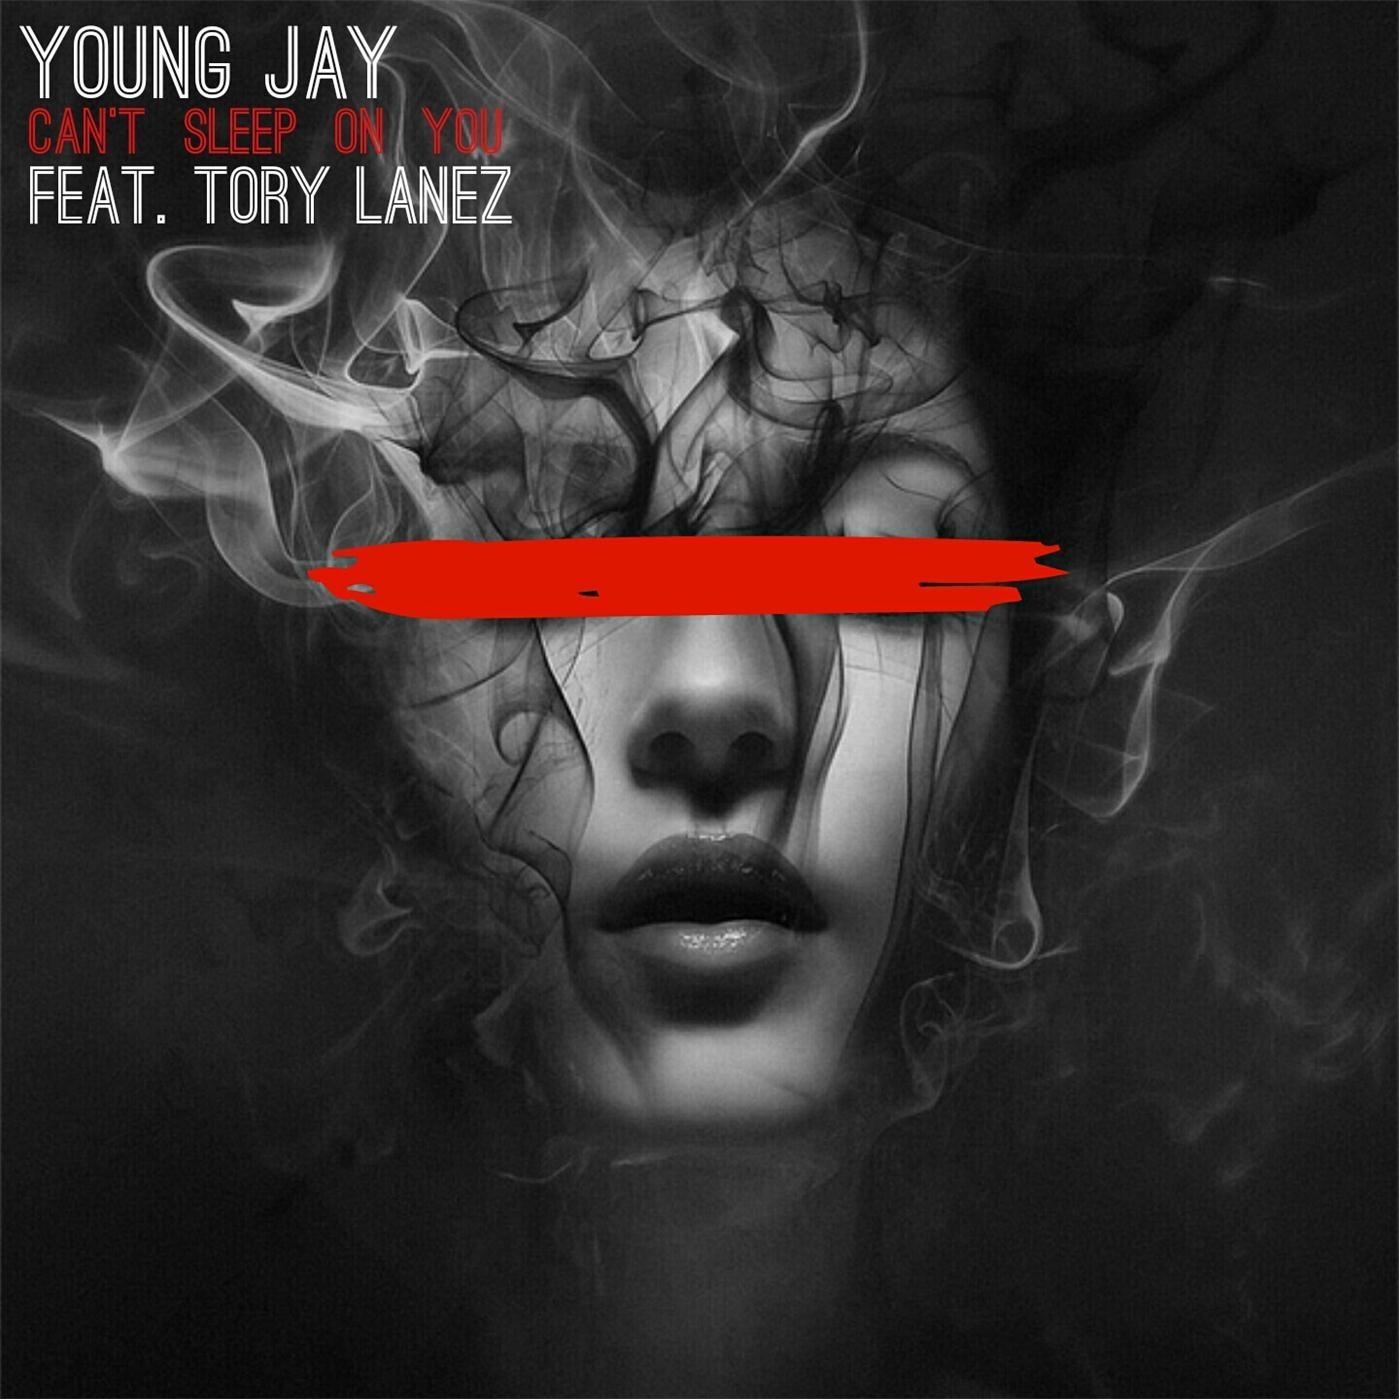 Young Jay - Can't Sleep on You (feat. Tory Lanez)